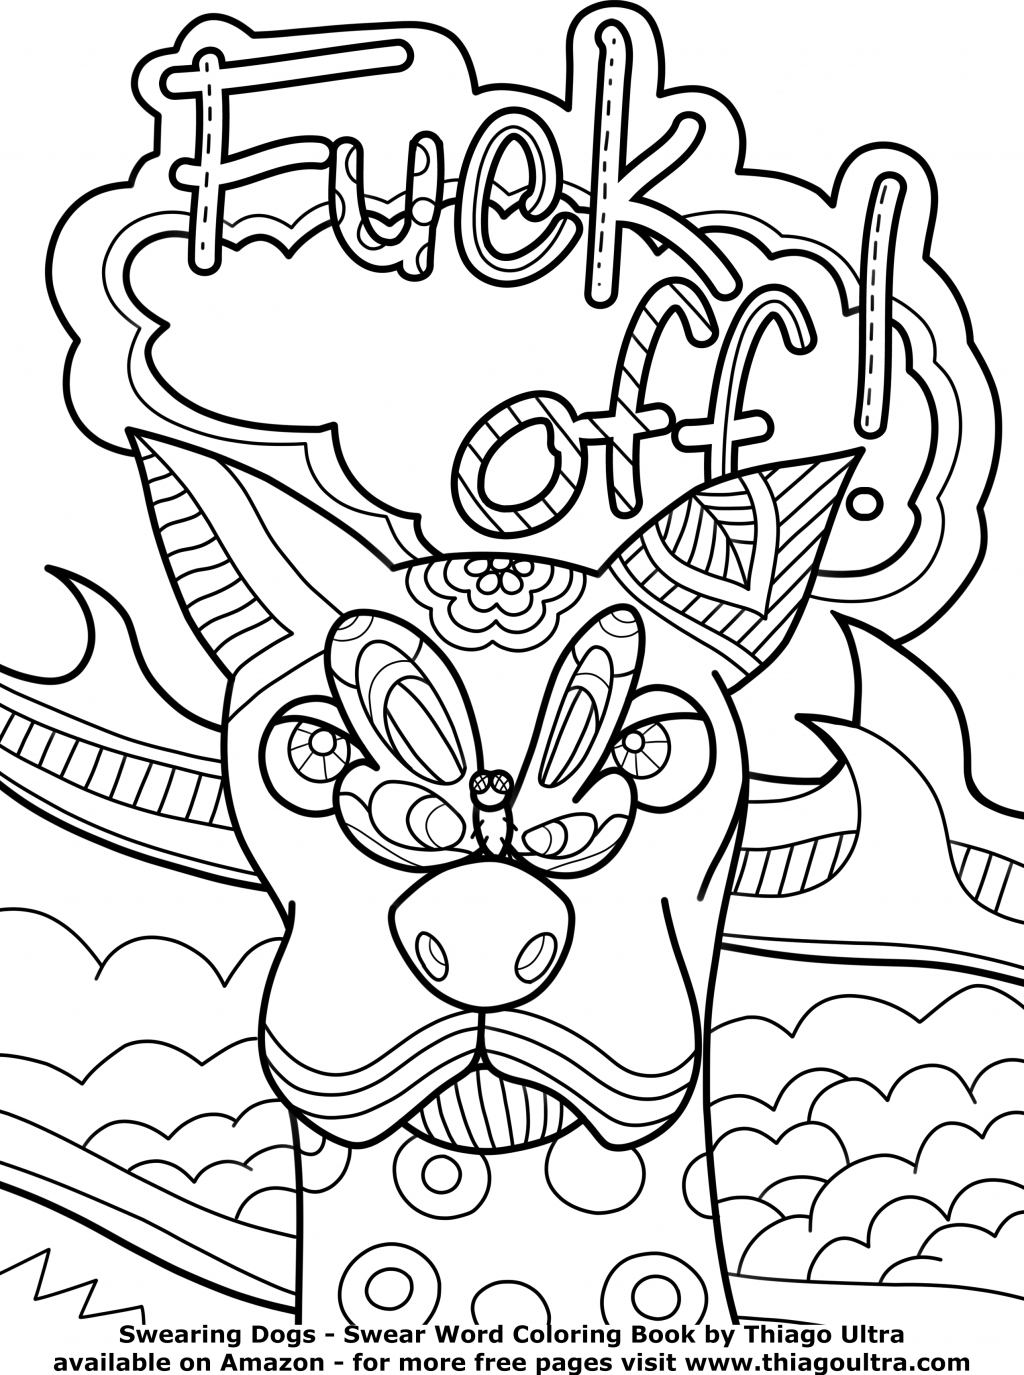 Coloring Pages Curse Words At Getdrawings | Free For Personal - Free Printable Coloring Pages For Adults Only Swear Words